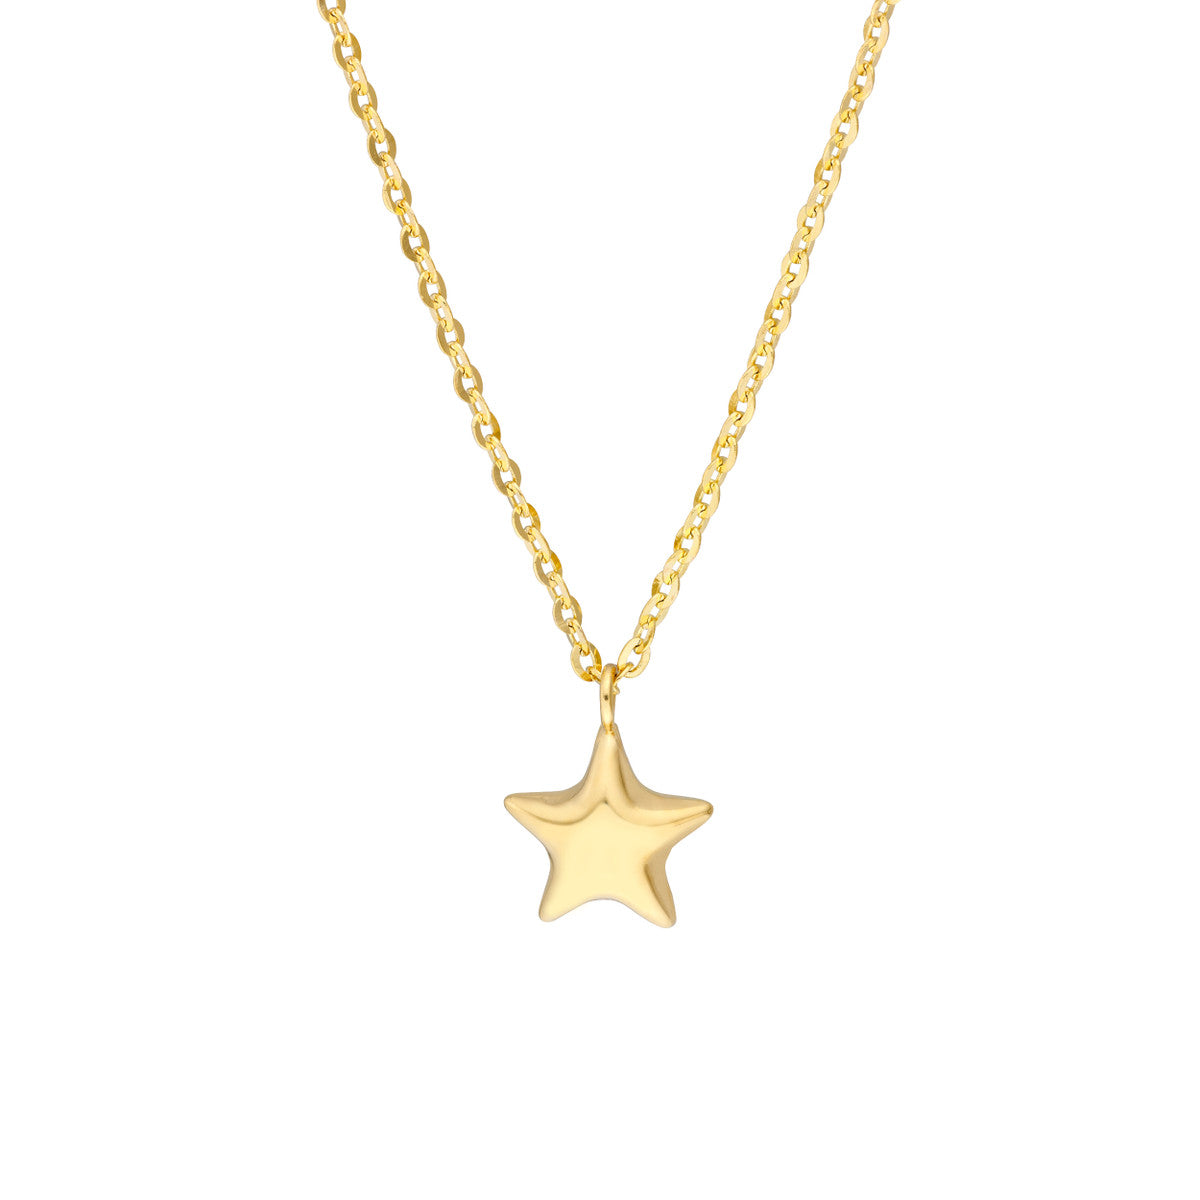 Children's 14k Yellow Gold Puffed Star Pendant Necklace